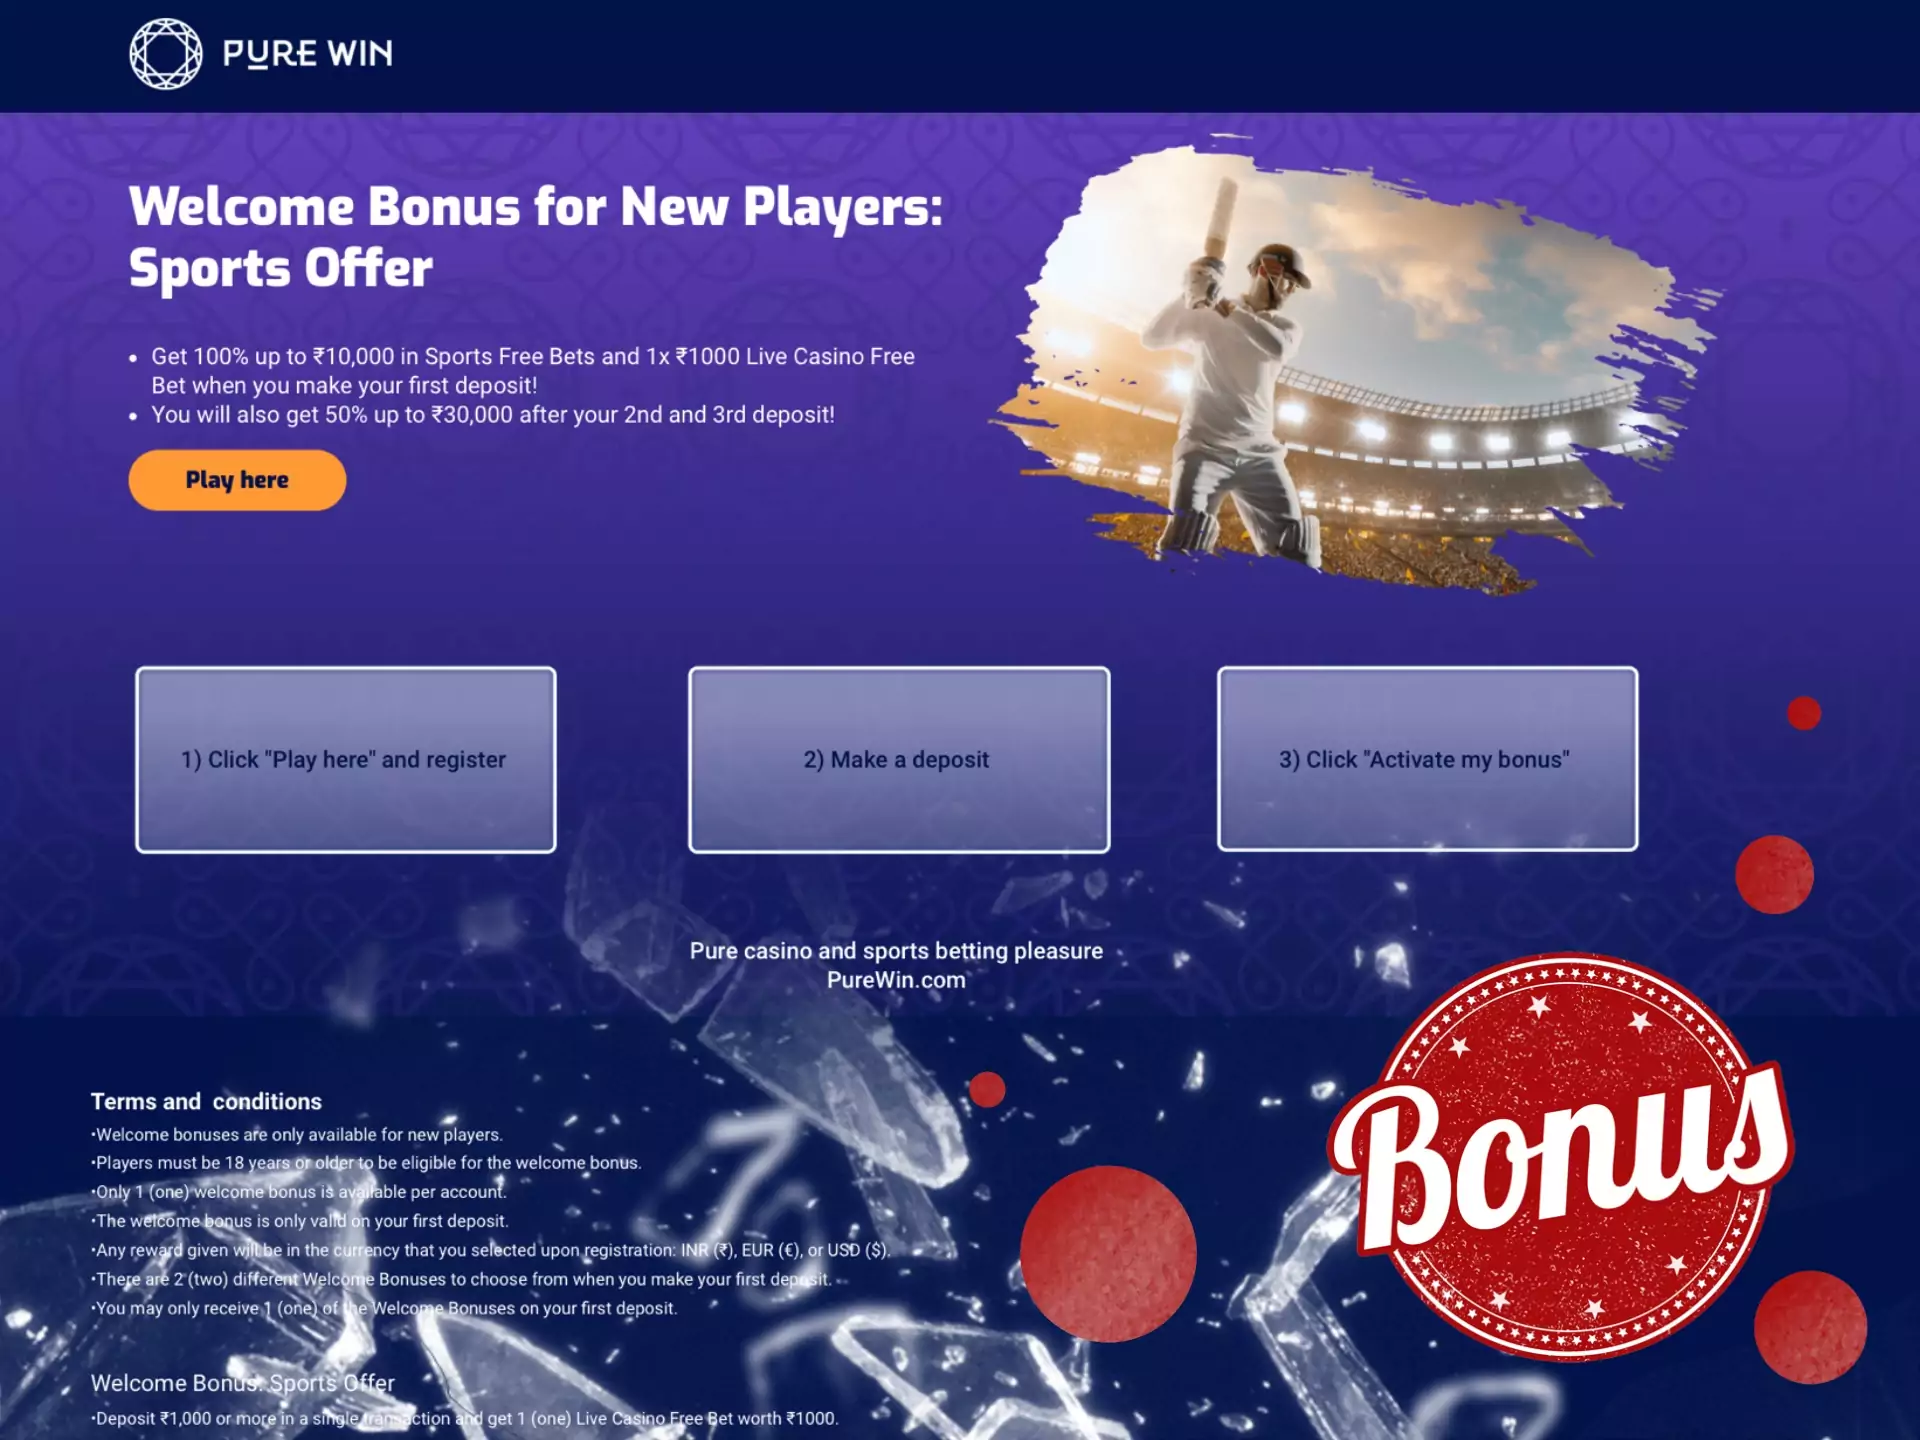 Bettors can receive a great welcome bonus too.